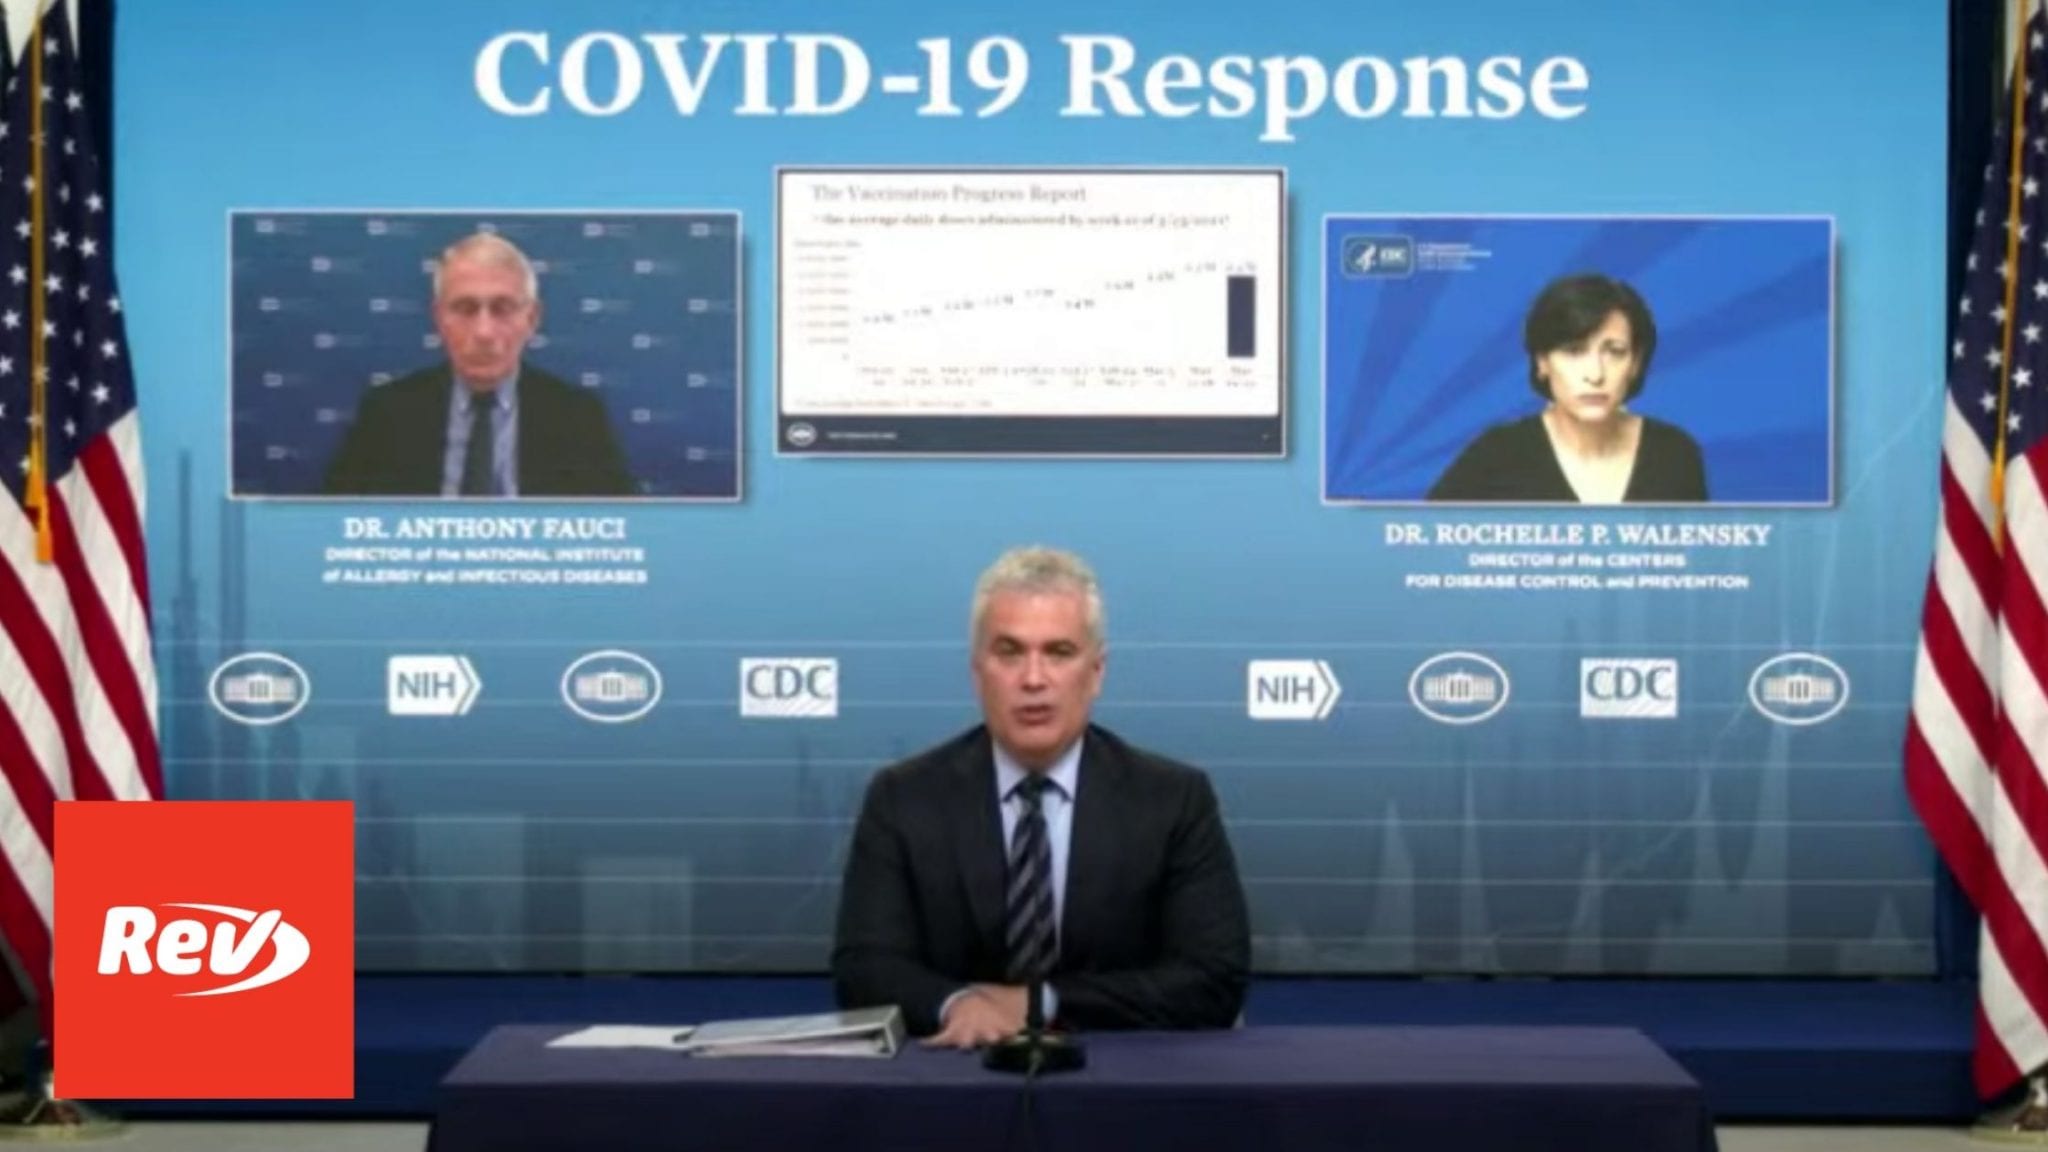 White House COVID-19 Task Force, Dr. Fauci Press Conference Transcript March 26